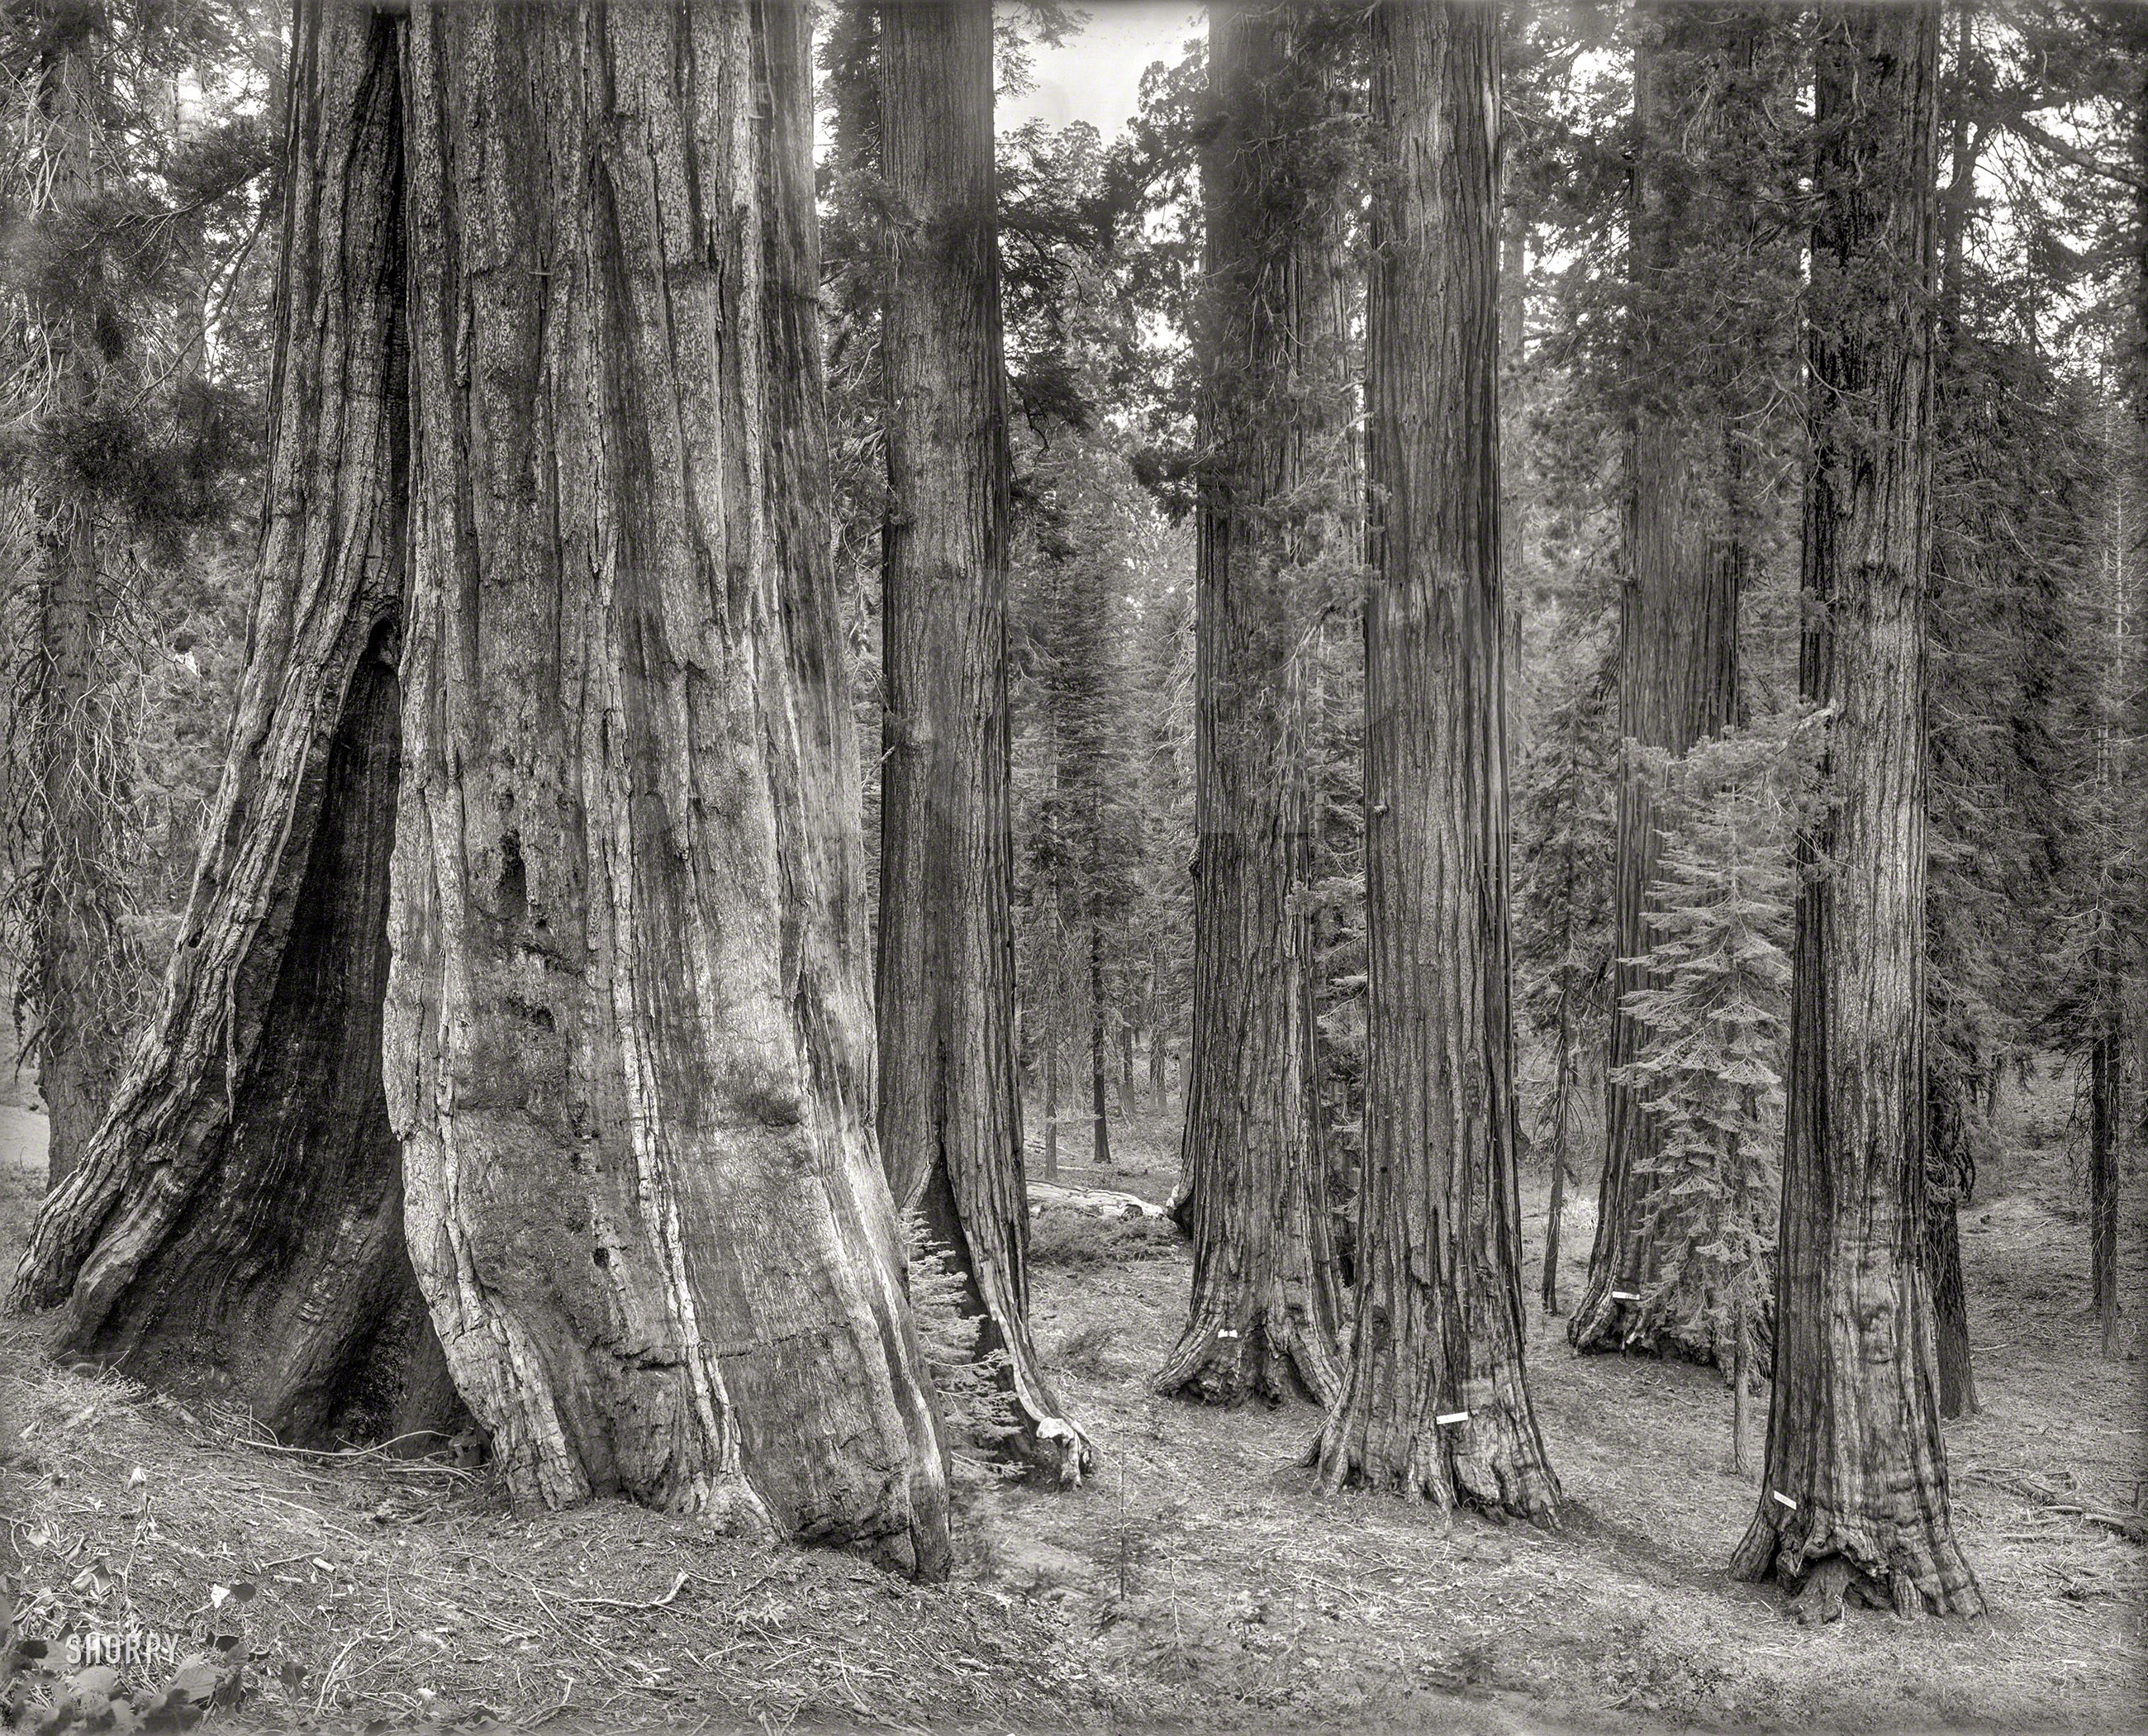 Circa 1890s California. An uncaptioned 8x10 glass plate of redwoods including the "Gen. Robert E. Lee" at right, which would make this Grant Grove in today's Kings Canyon National Park. Another is labeled "South Carolina." View full size.